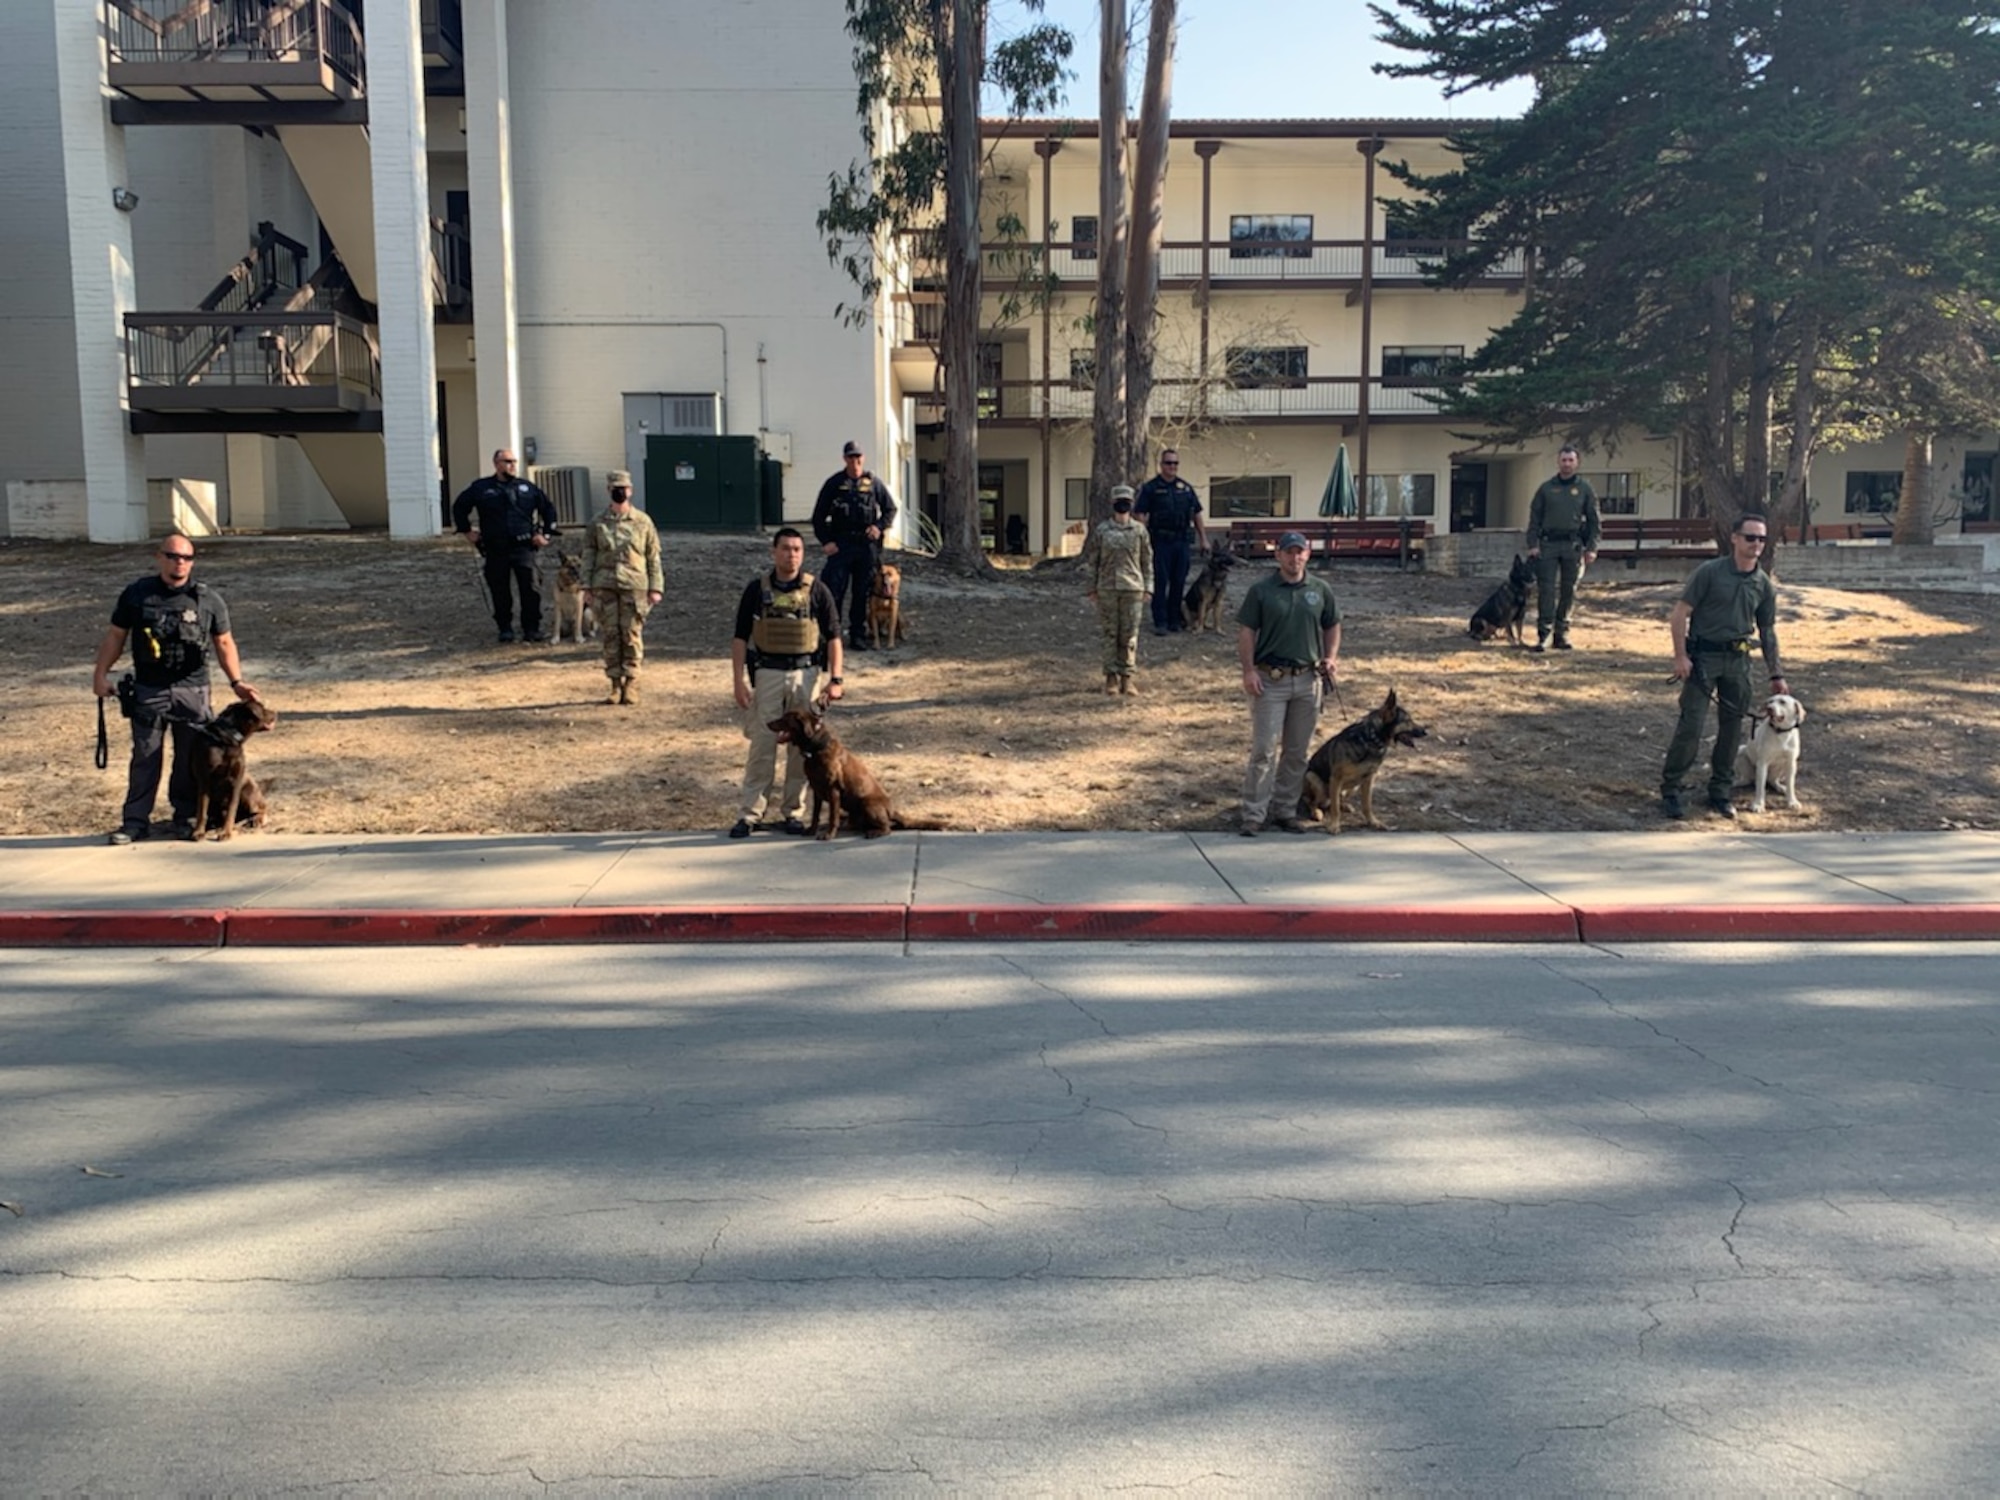 Members from the 517 Training Group and two police departments stand for a photo in front of dormitories housing Airmen at the Presidio of Monterrey, California Oct. 15th, 2020. The canine unit swept through the dormitories inspecting living conditions and searching for drugs or paraphernalia. (Courtesy Photo Deputy Chief of Monterey Police Department David Armacost)